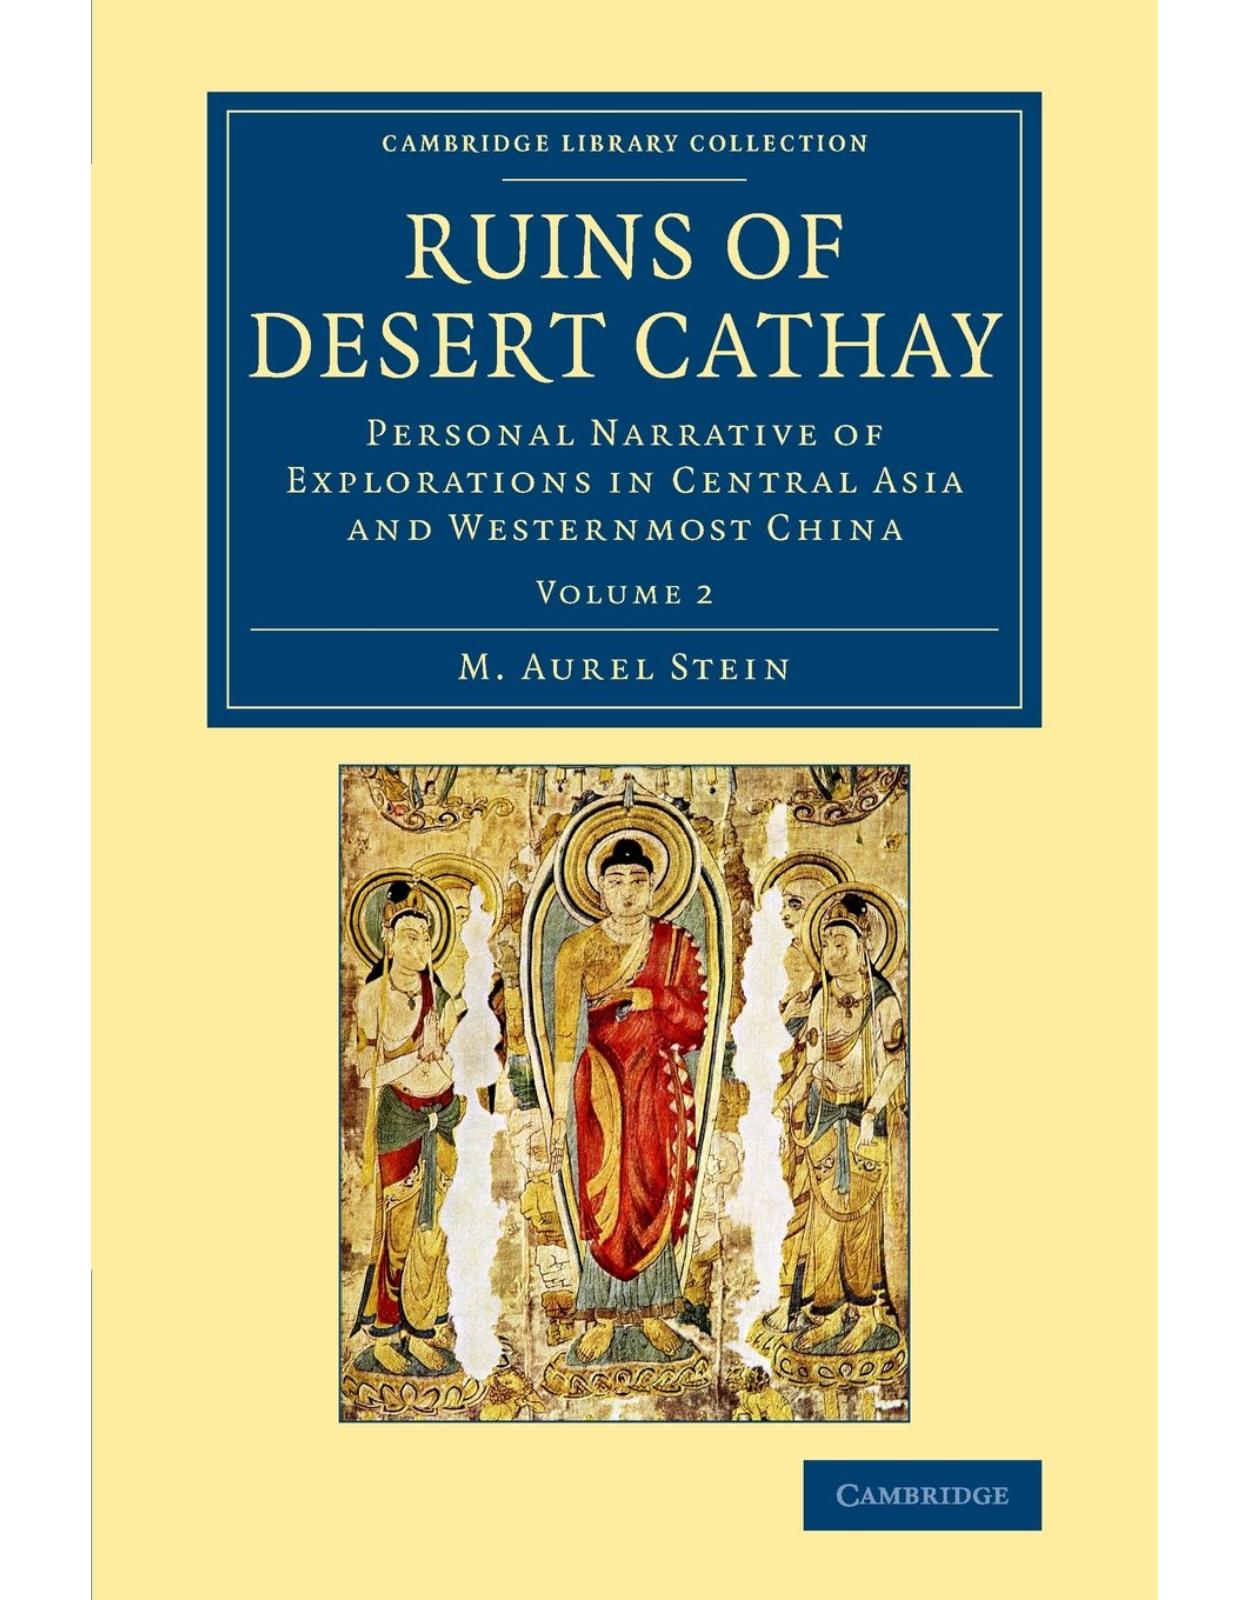 Ruins of Desert Cathay 2 Volume Set: Ruins of Desert Cathay: Personal Narrative of Explorations in Central Asia and Westernmost China: Volume 2 (Cambridge Library Collection - Archaeology)